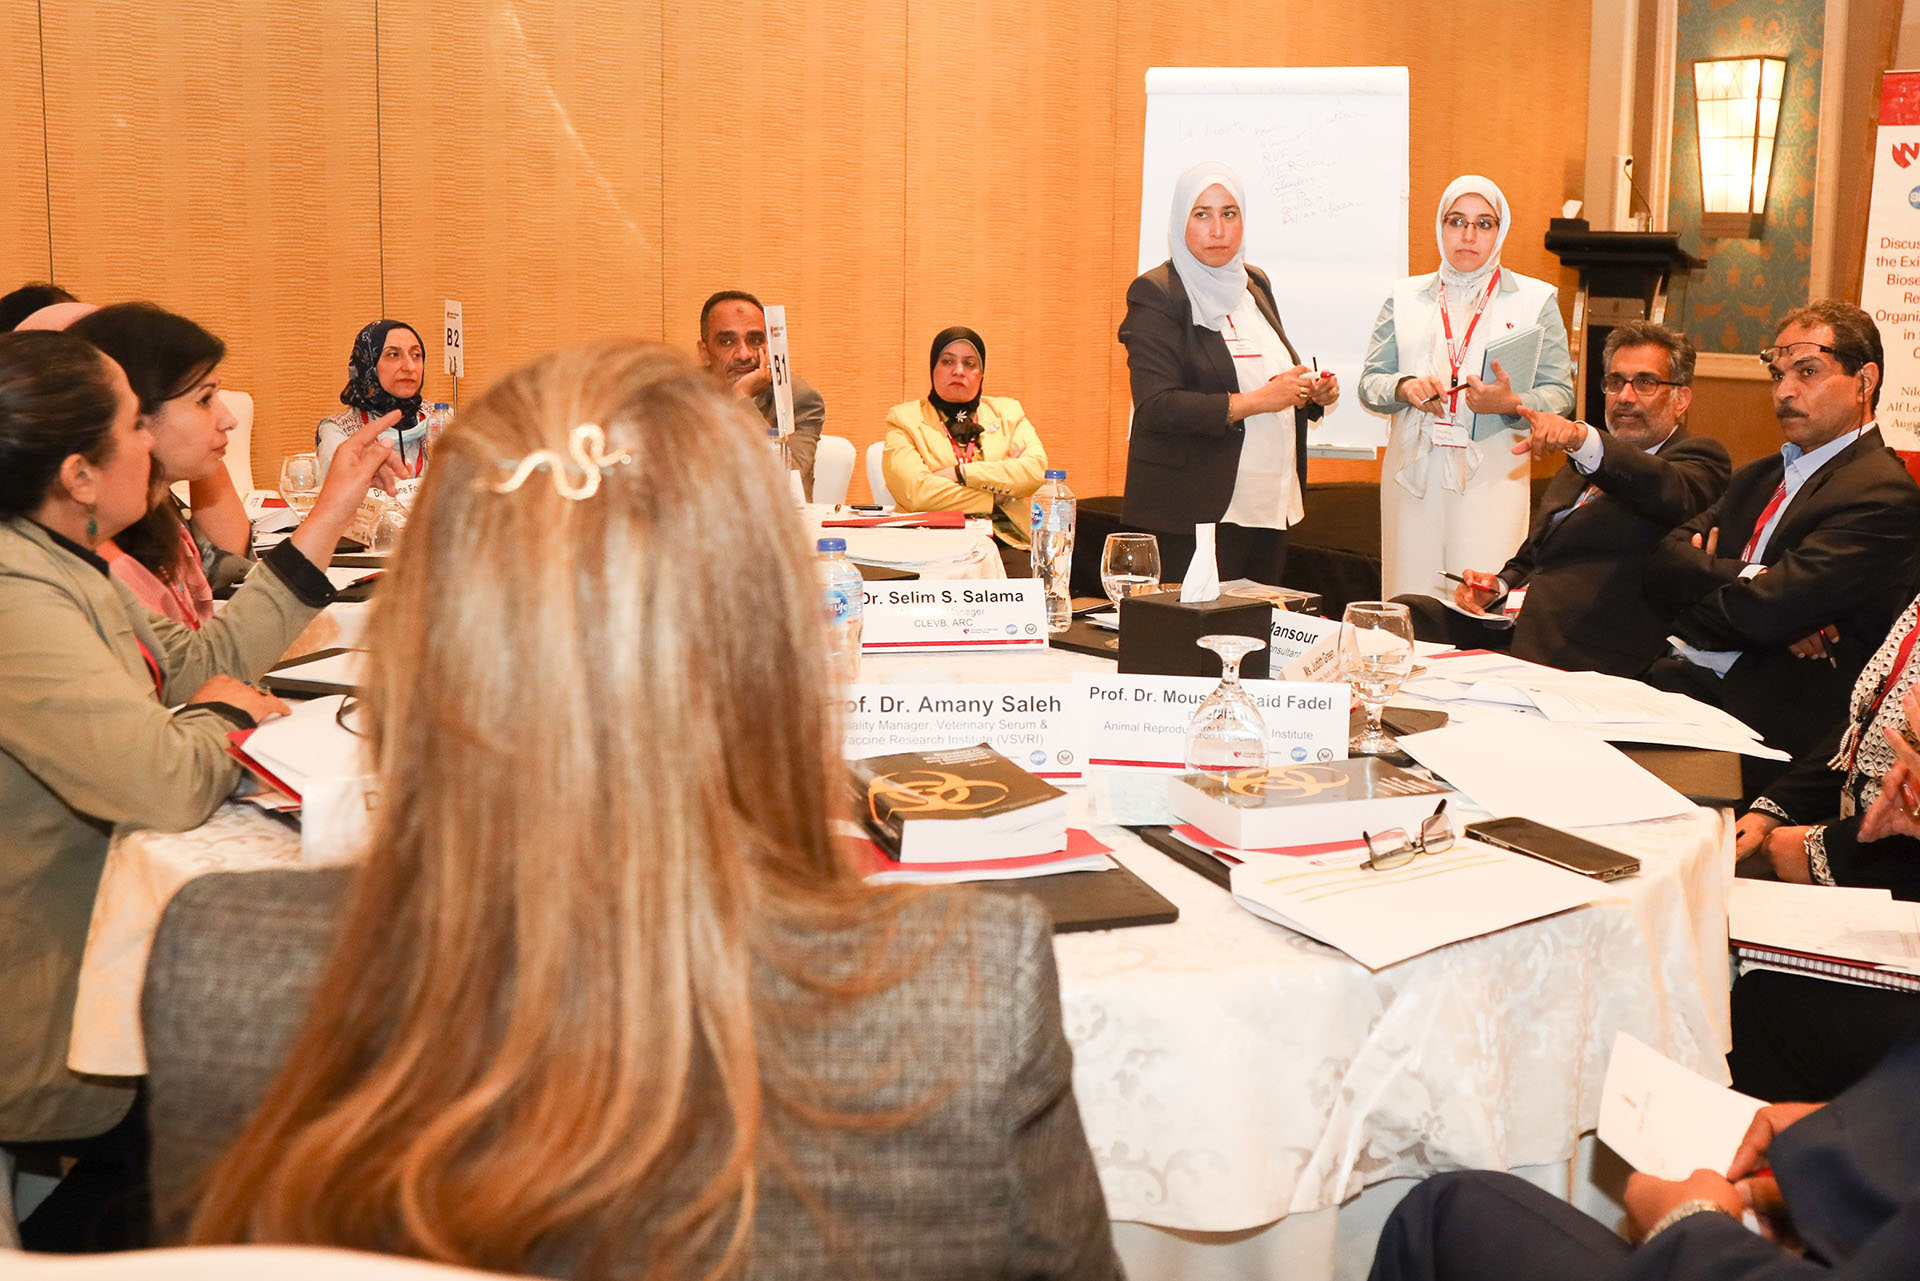 At right&comma; Ali Khan &lpar;arm extended&rpar;&comma; MD&comma; MPH&comma; dean of the UNMC College of Public Health&comma; leads a workshop in Egypt along with other members of the college&period;